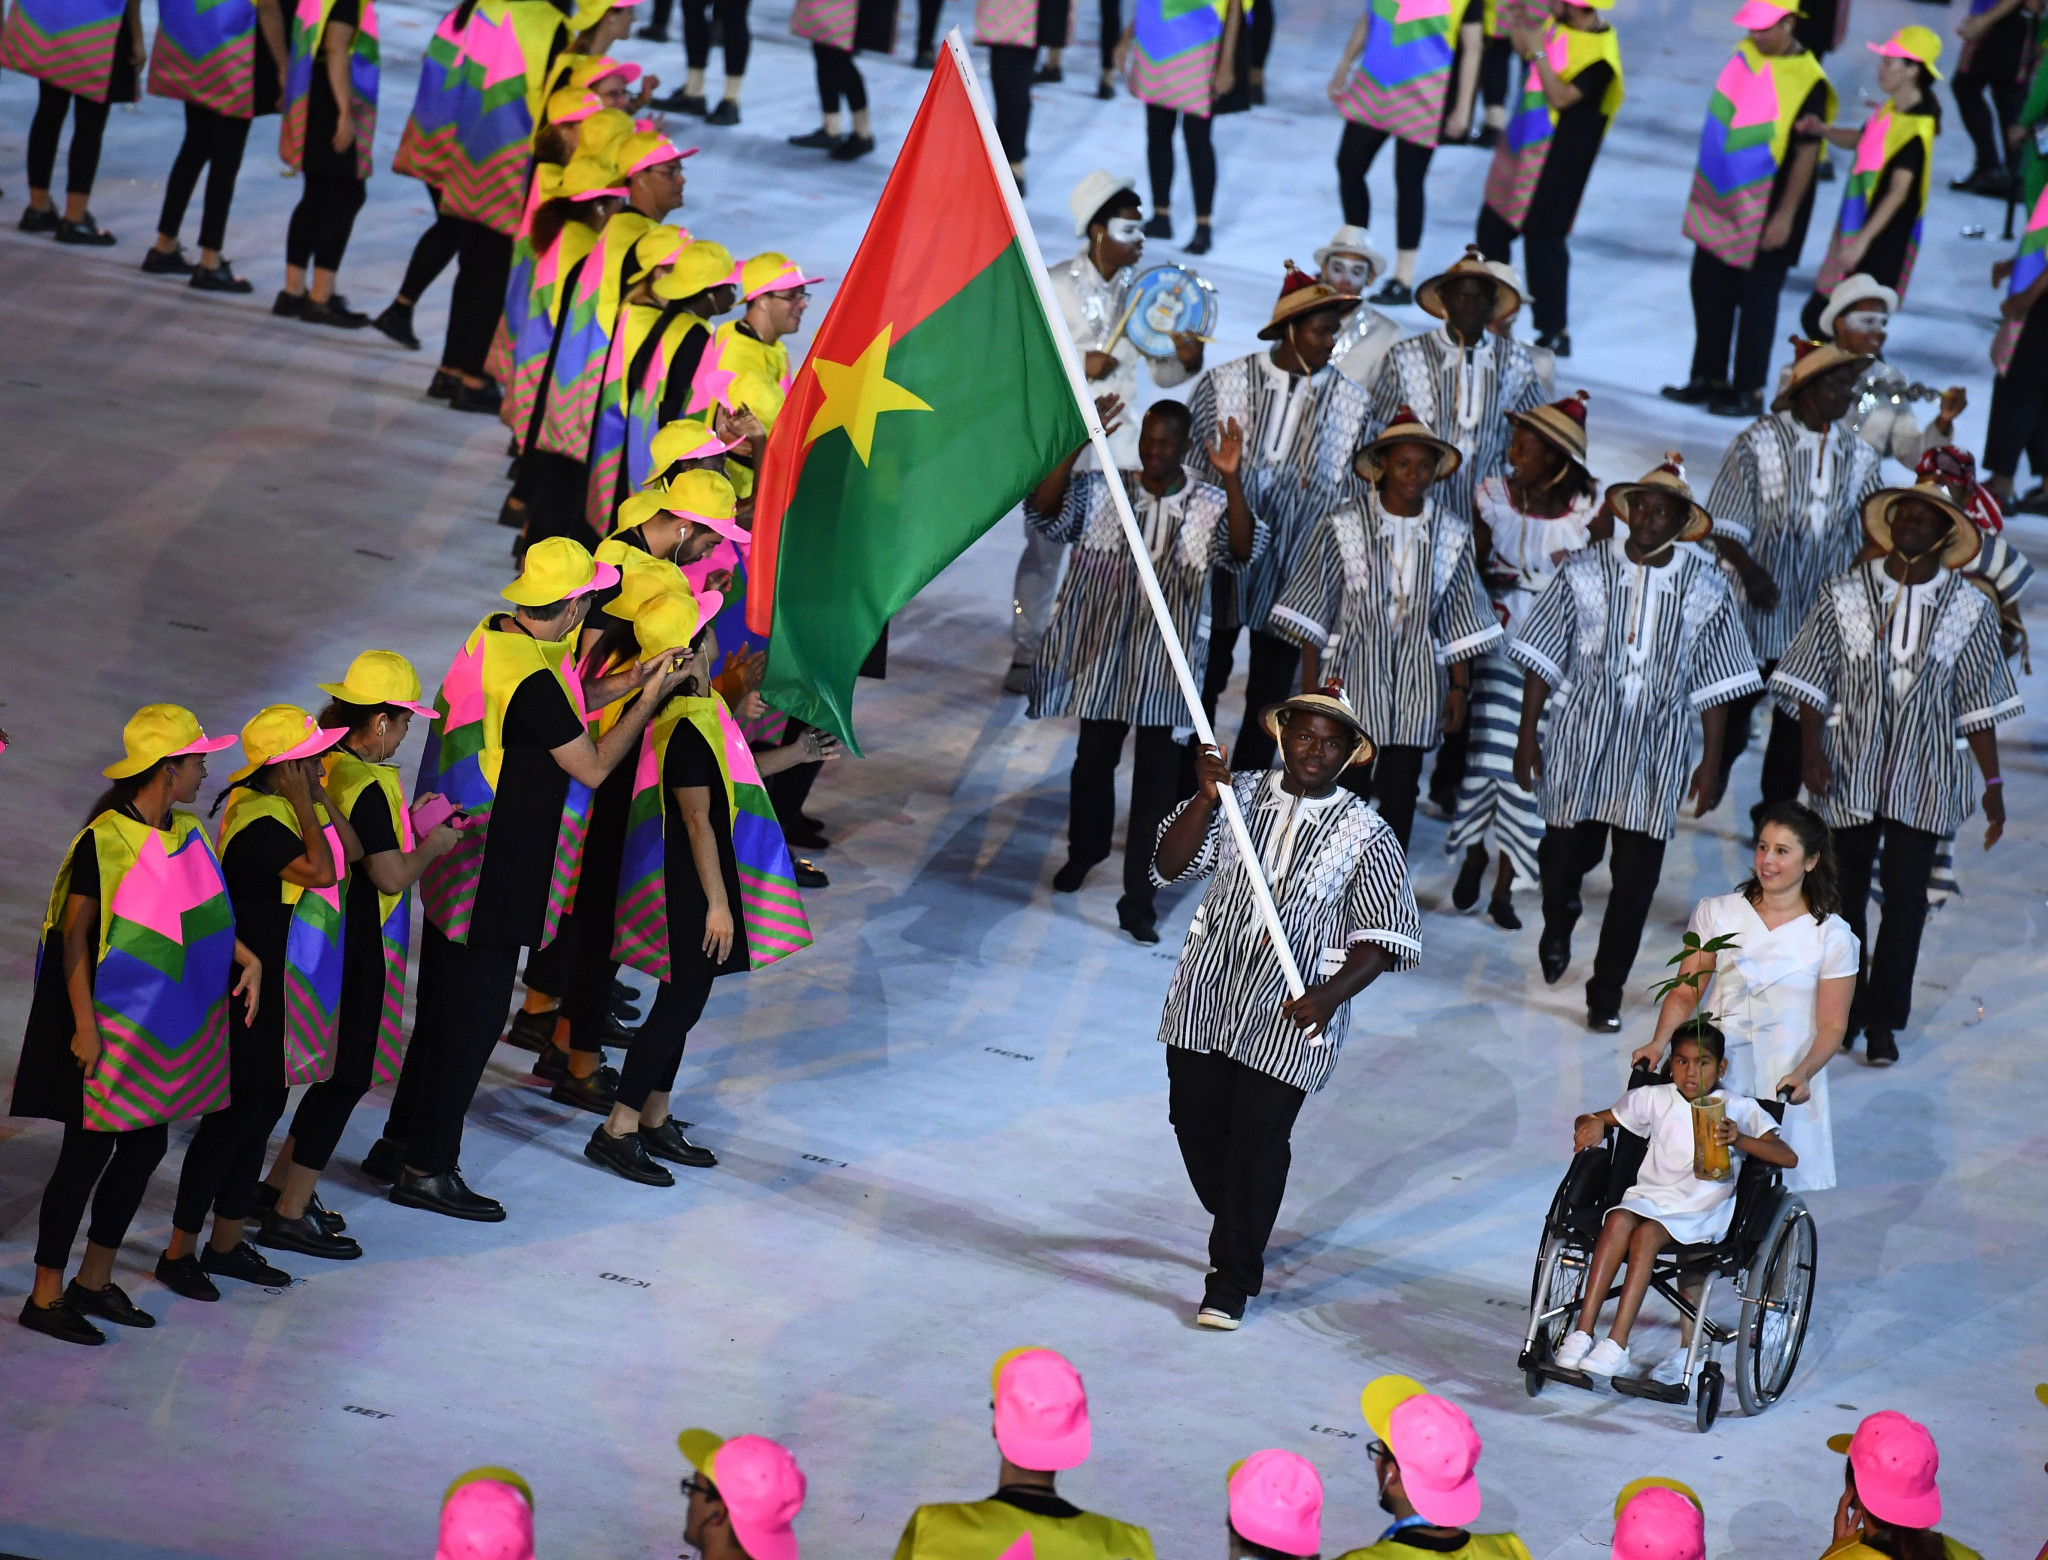 Burkina Faso has never hosted the African Games  ©Getty Images